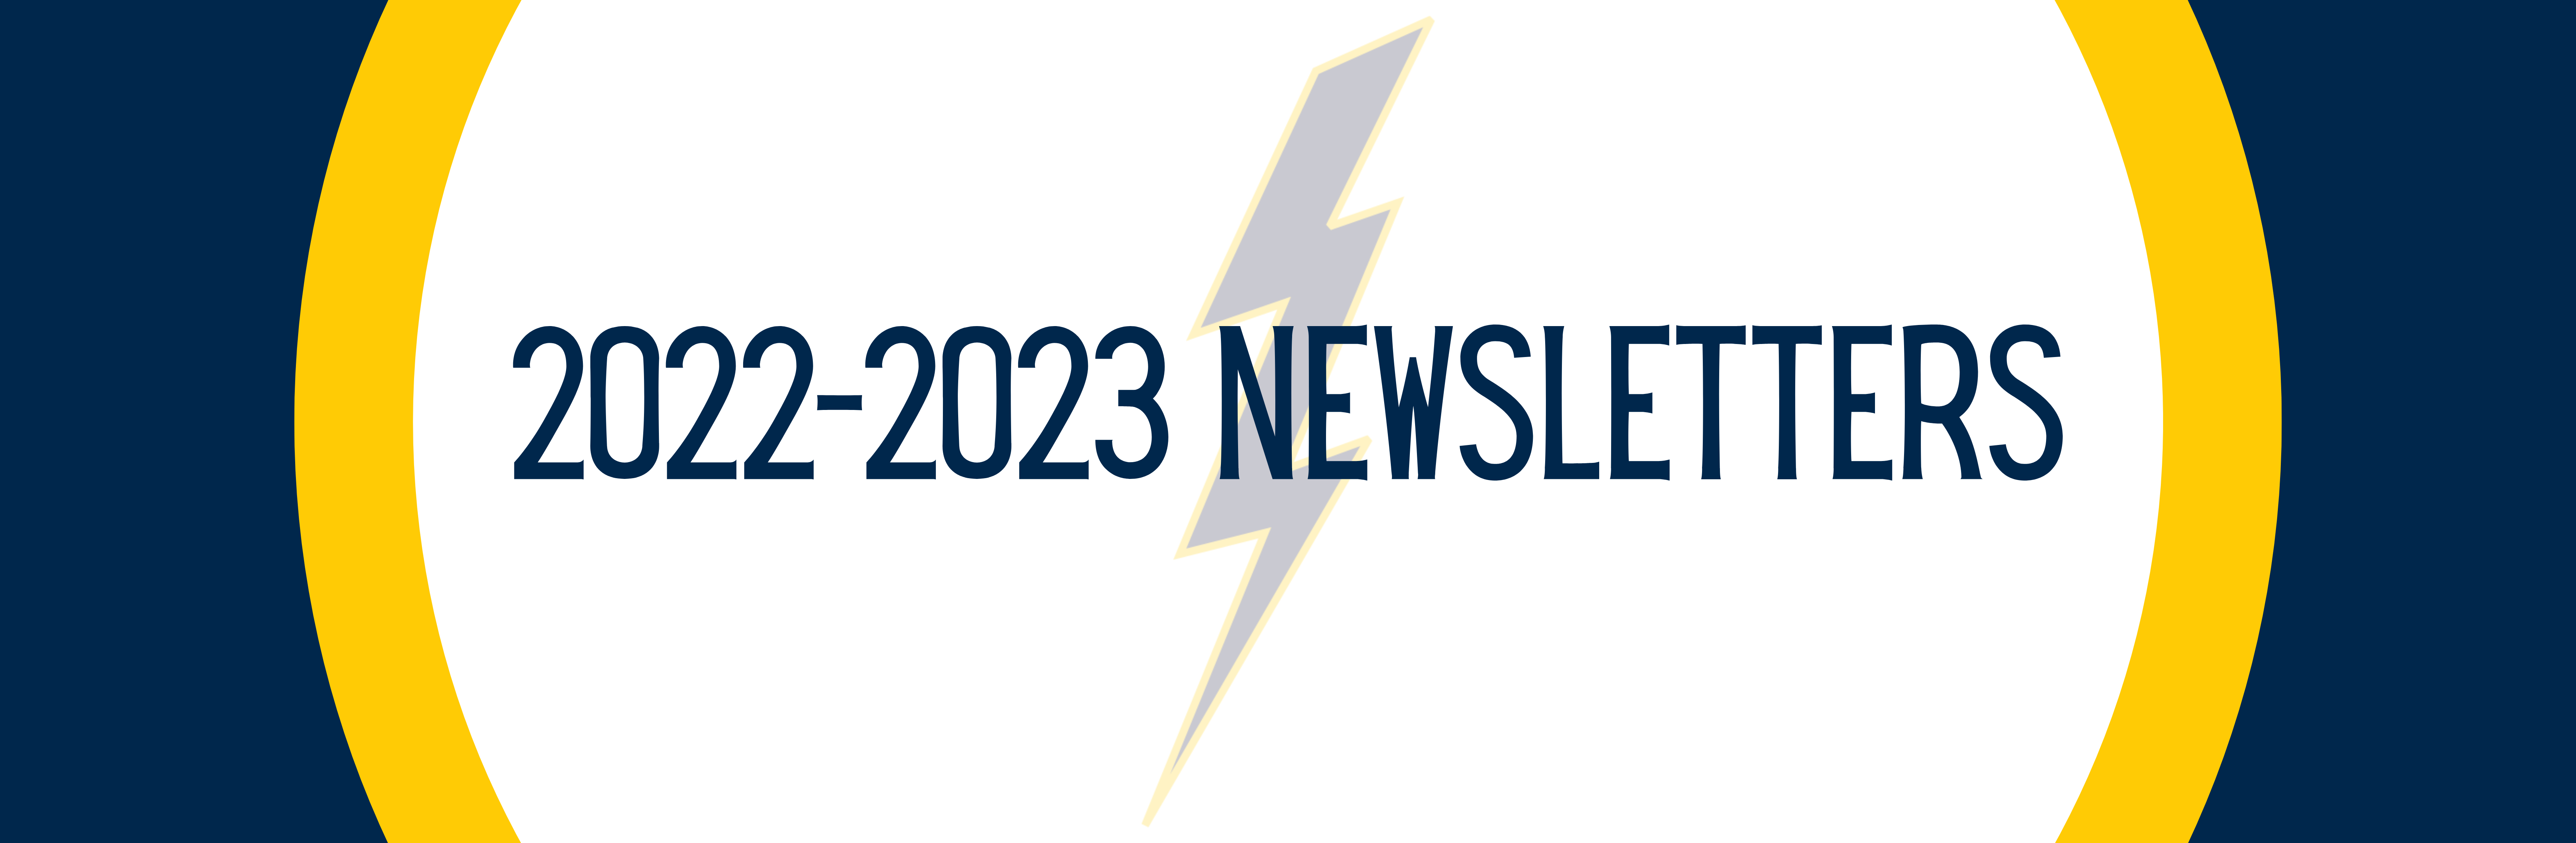 2022 Newsletters